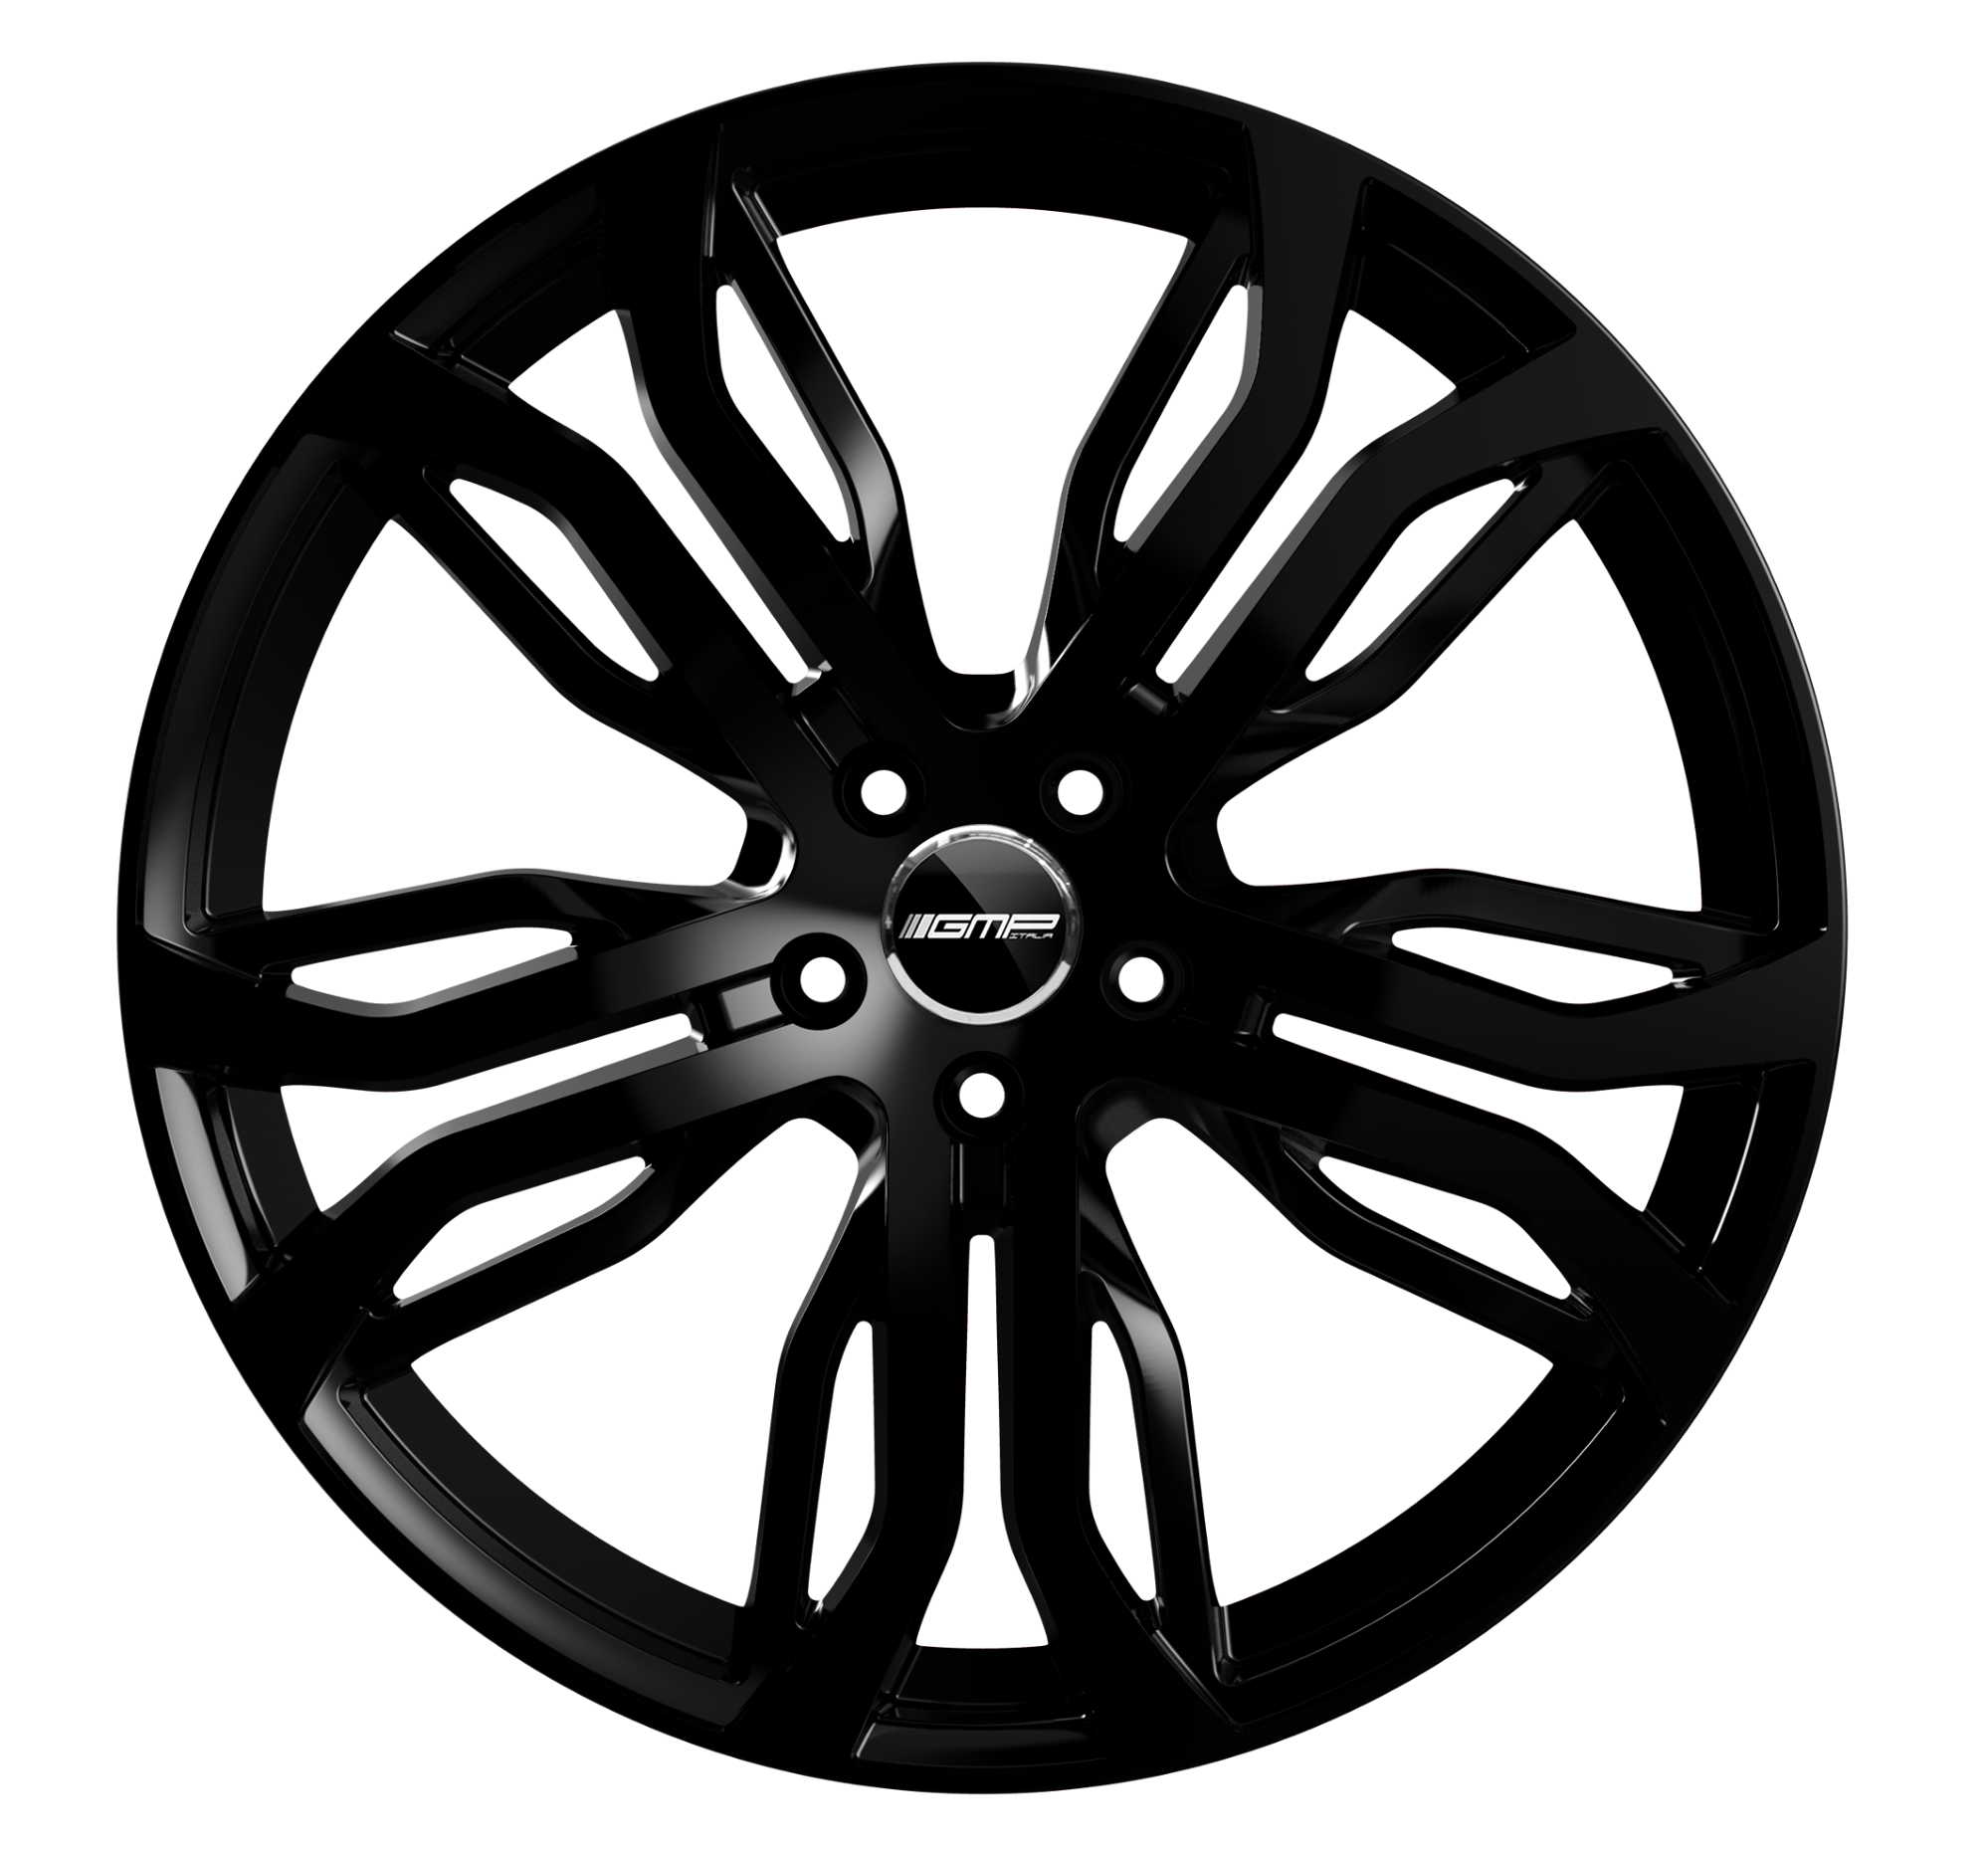 Alloy Wheel PNG Image